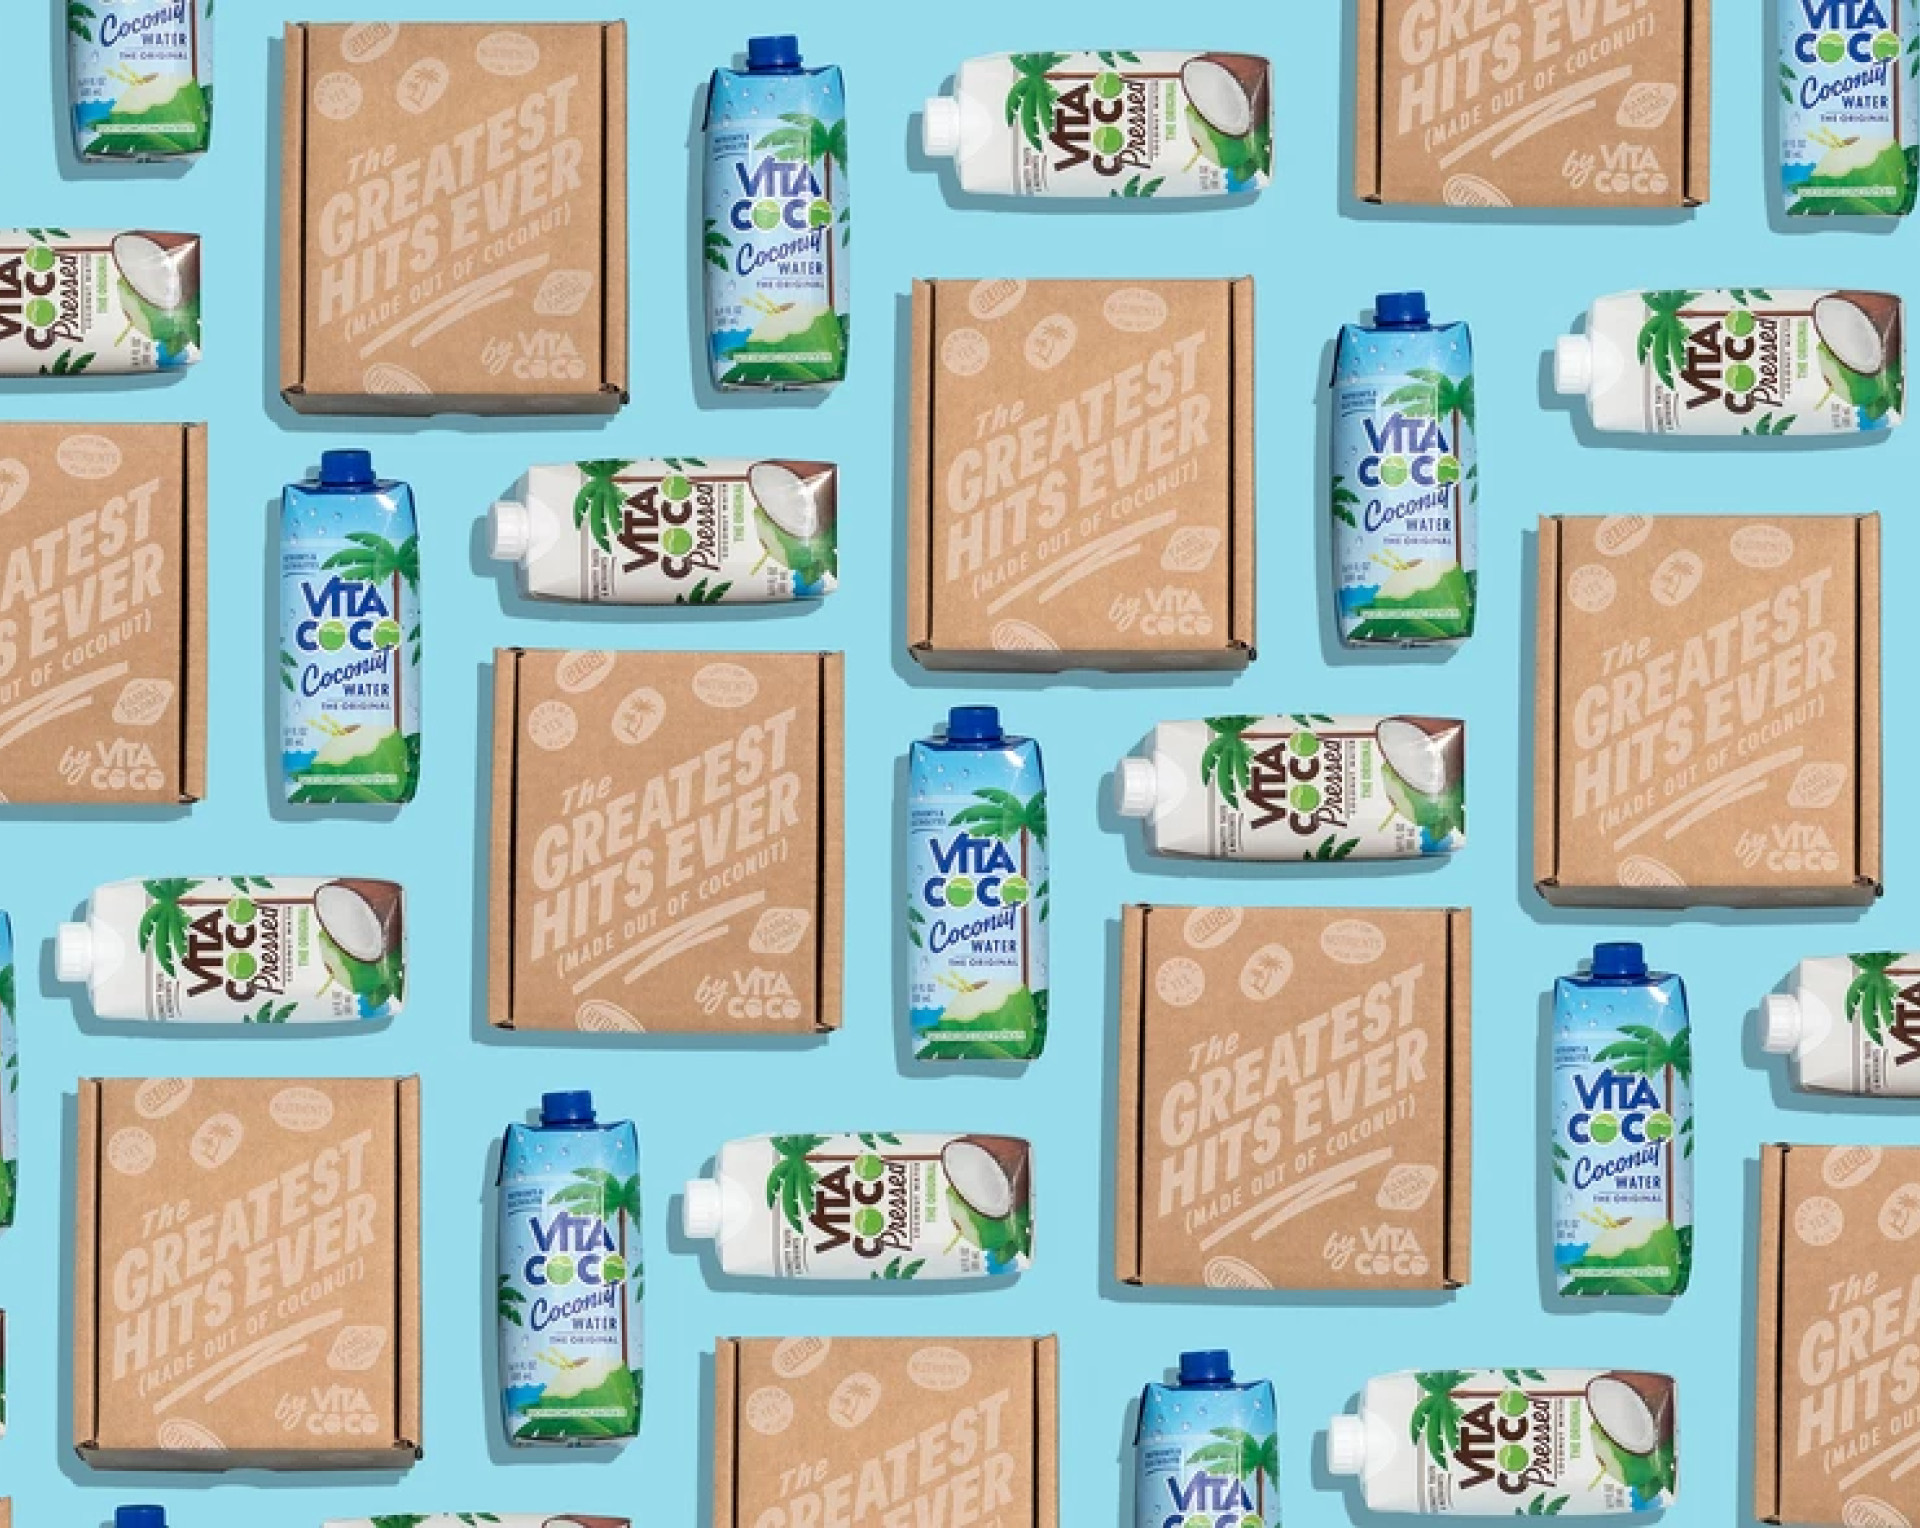 Vita Coco: From Online Growth to IPO and Beyond.